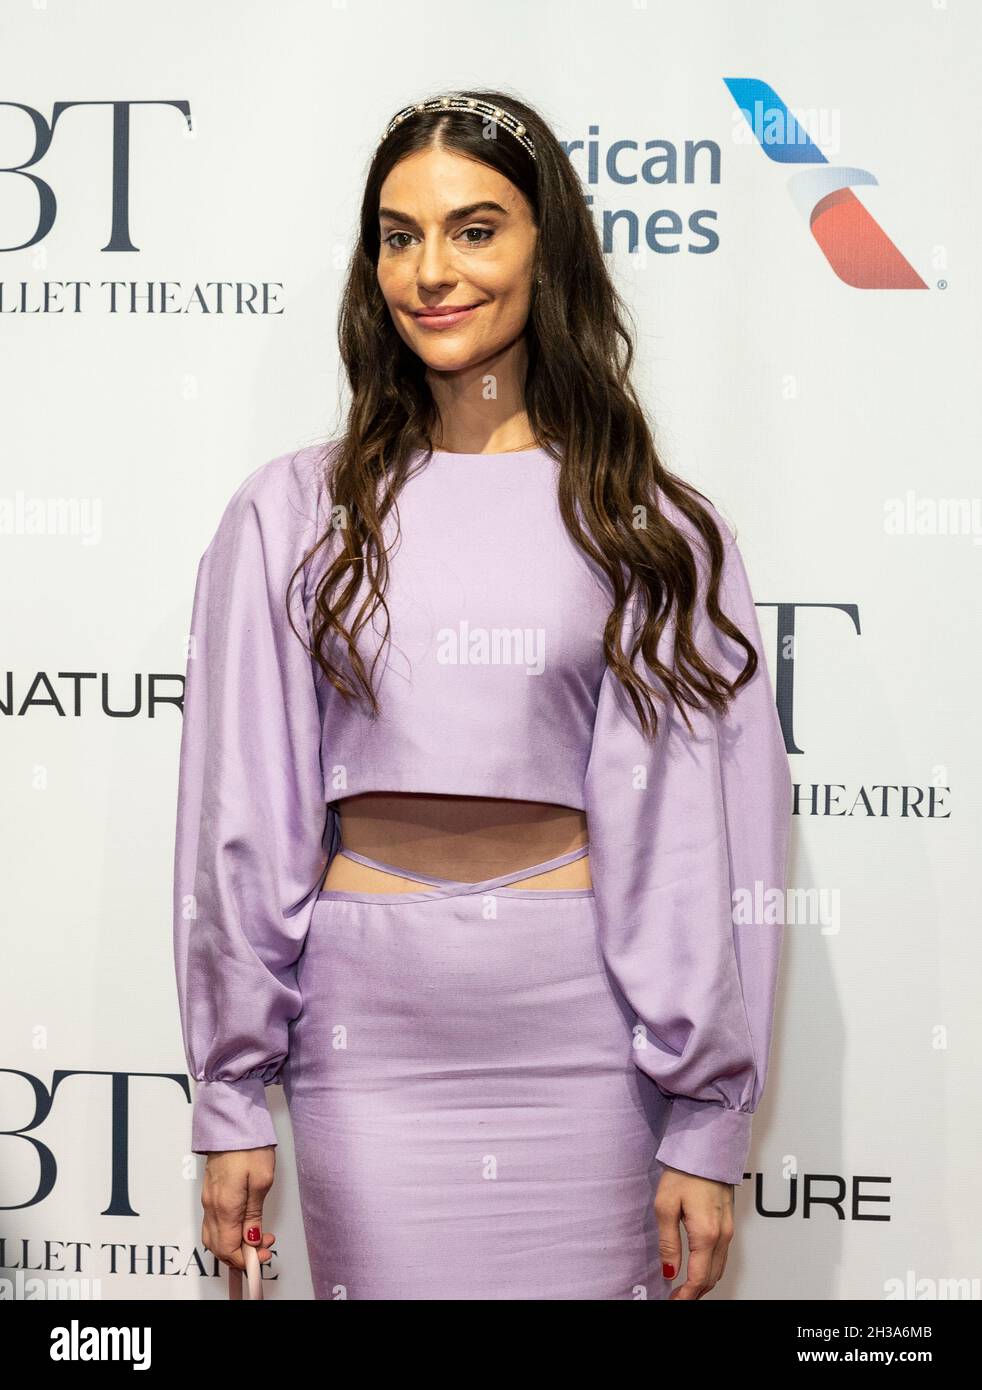 New York, USA. 26th Oct, 2021. Ariana Rockefeller attends American Ballet Theatre's Fall Gala at David Koch Theater at Lincoln Center in New York on October 26, 2021. (Photo by Lev Radin/Sipa USA) Credit: Sipa USA/Alamy Live News Stock Photo